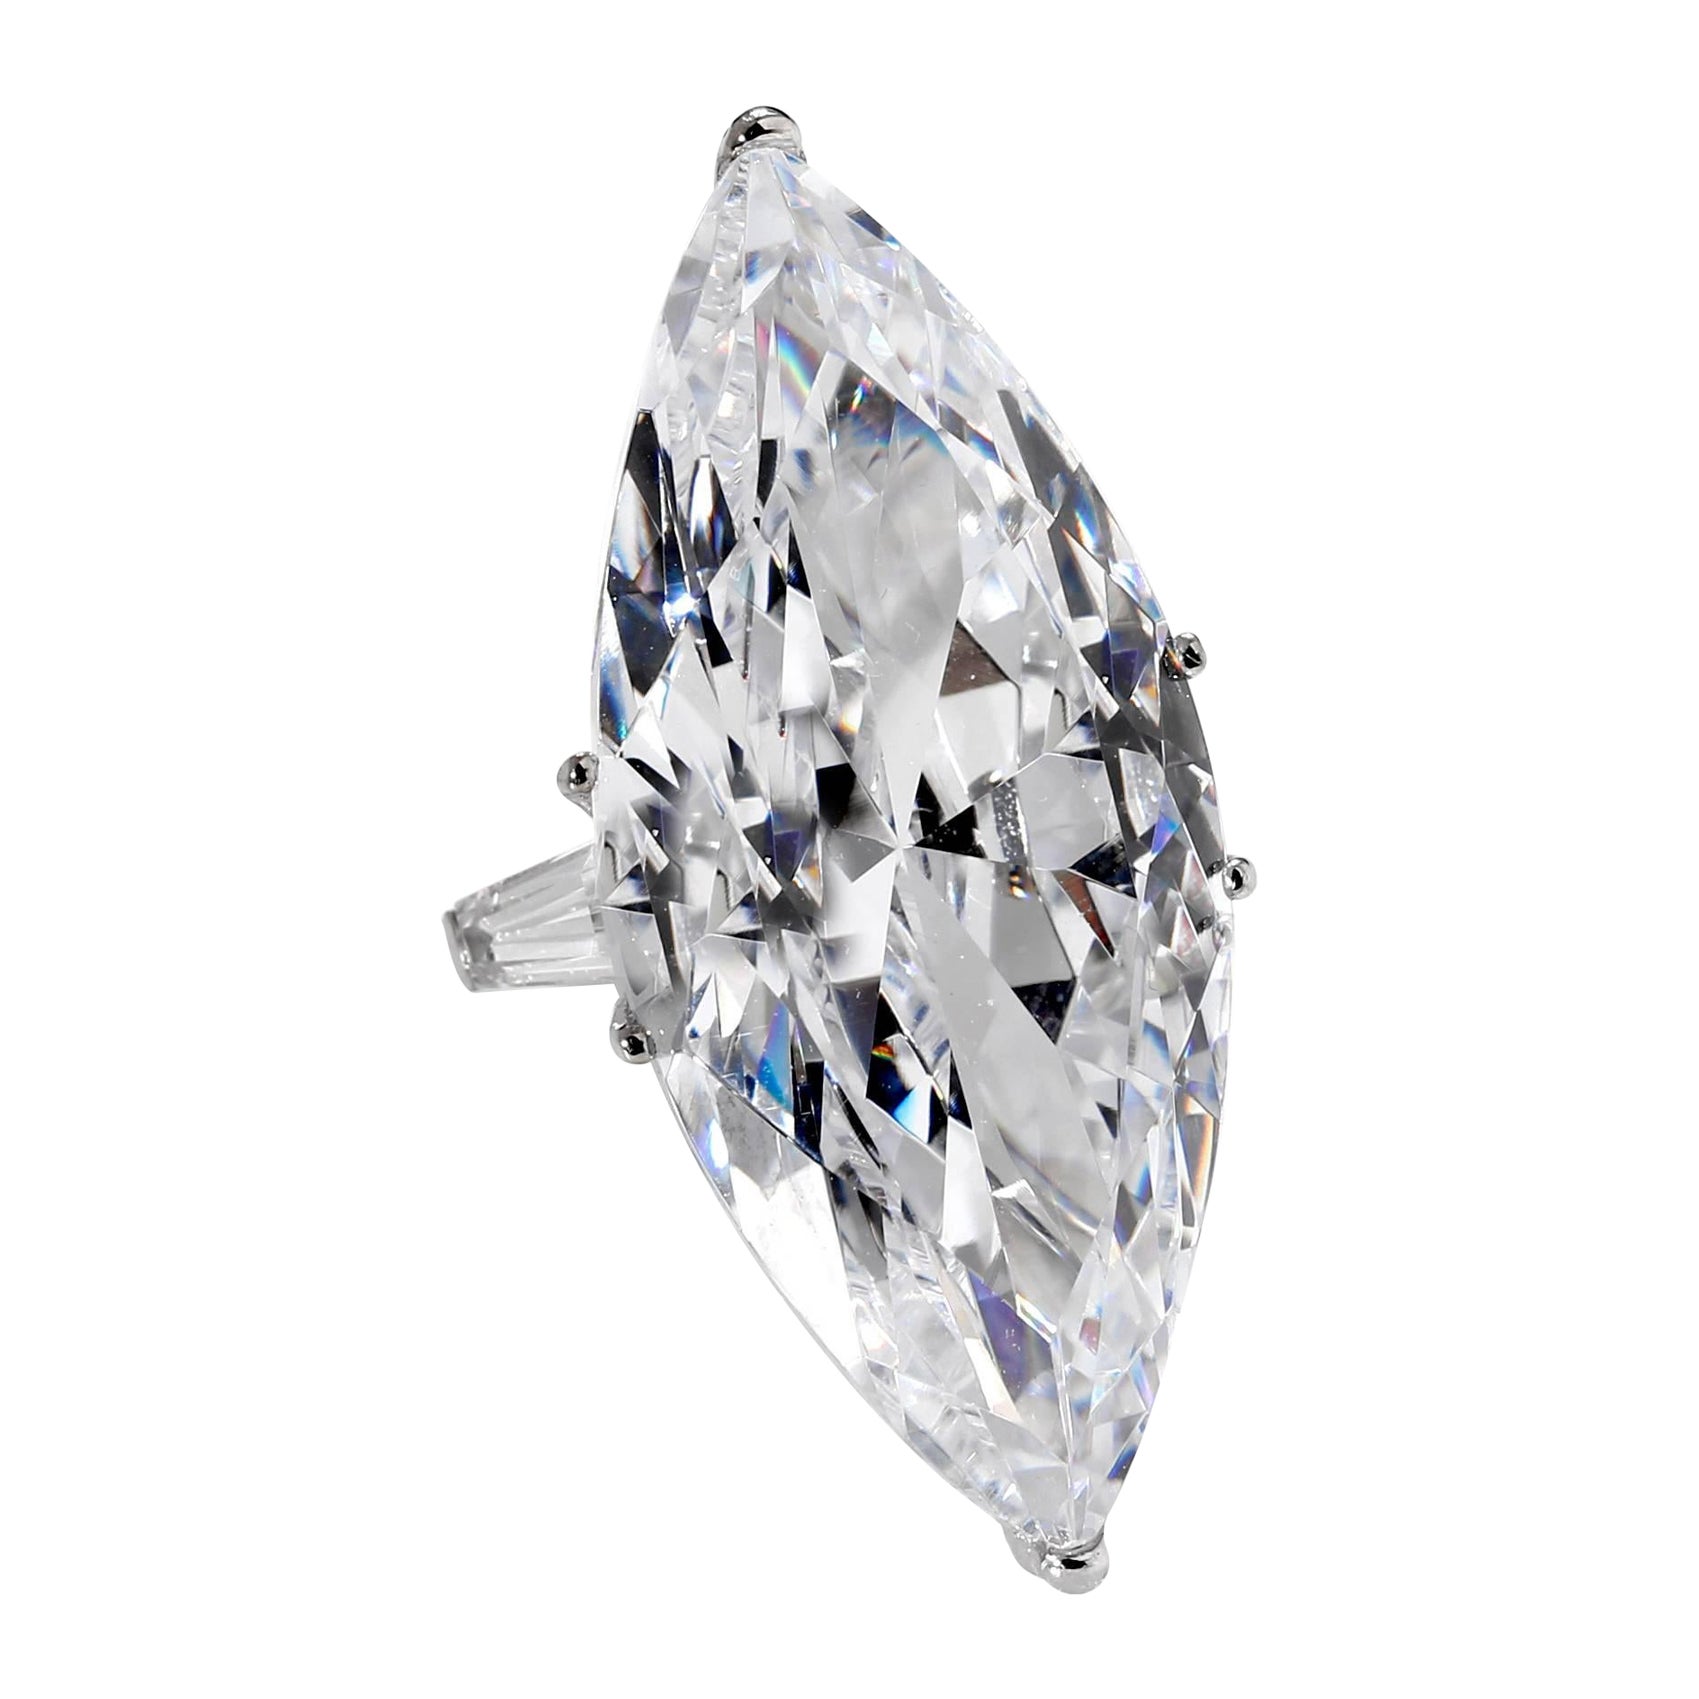 The Jackie O Faux CZ Lesotho 40 Carat Marquise Diamond Ring Copy by Clive Kandel For Sale